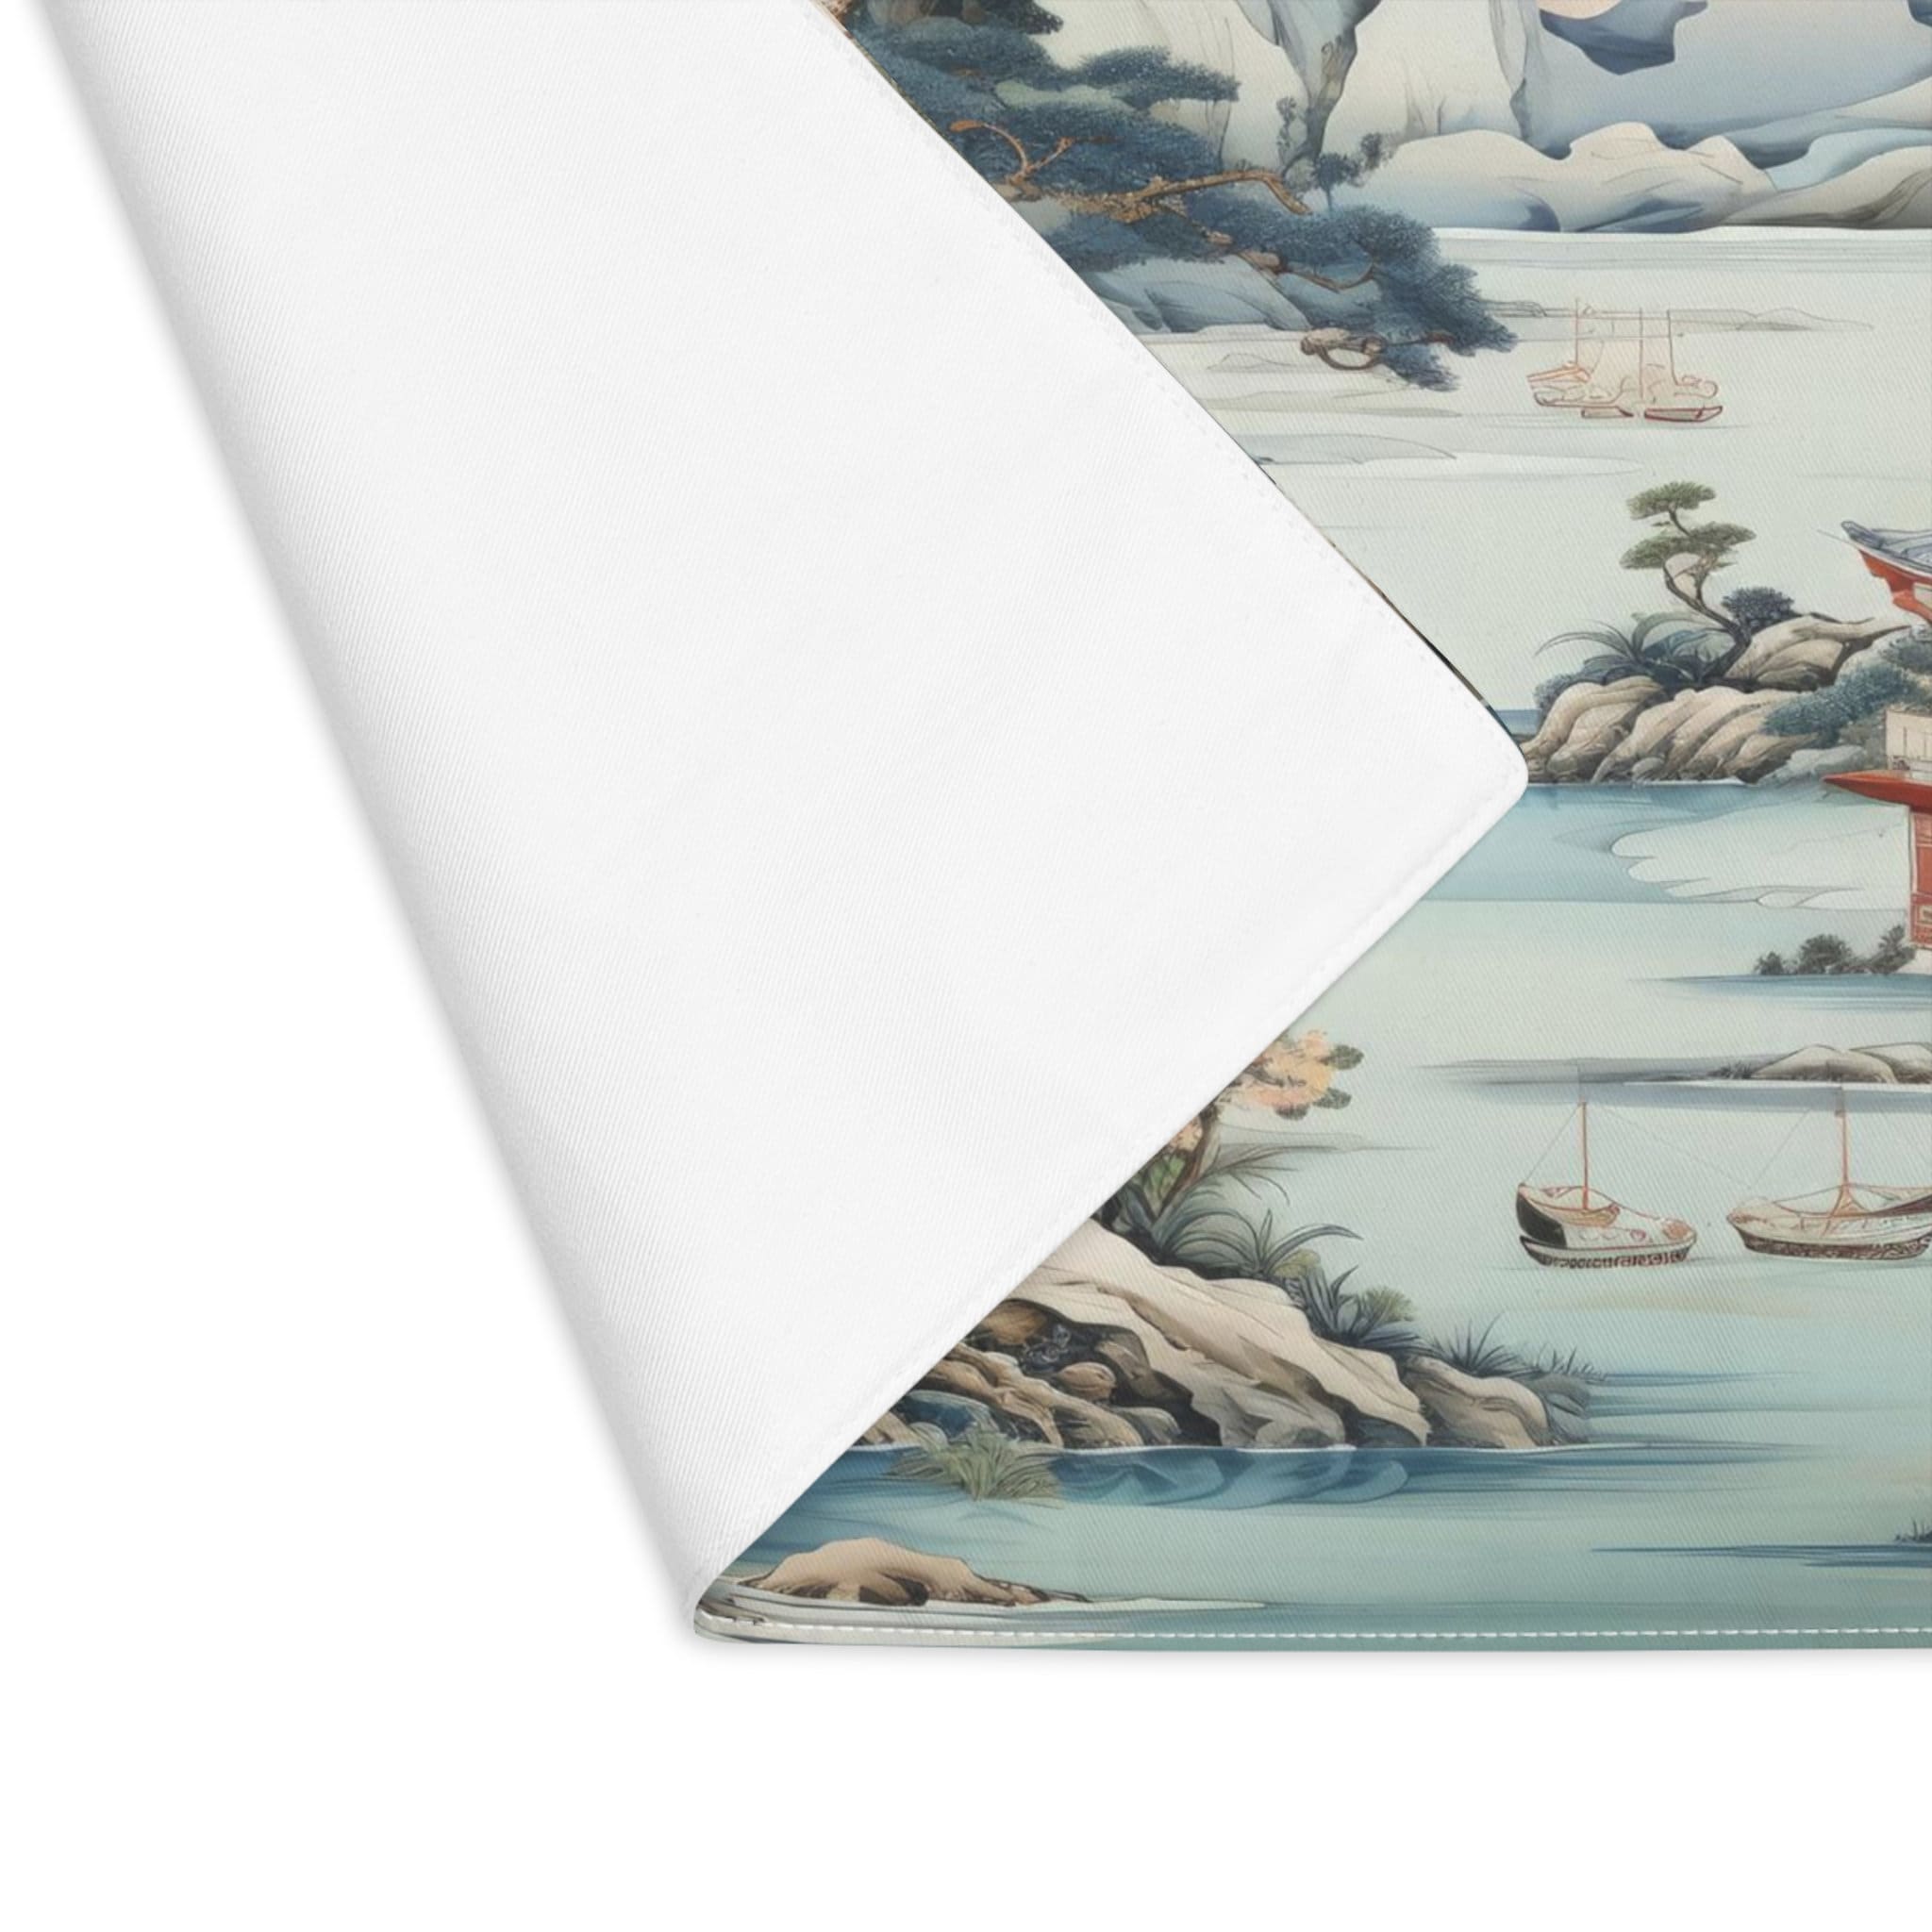 Kate McEnroe New York Chinoiserie Pagoda Landscape Floral Fabric Placemat, Country Farmhouse Table Linen, Wedding Table Decor, Grandmillenial Kitchen - 121681023 Placemats 24445572810059951433